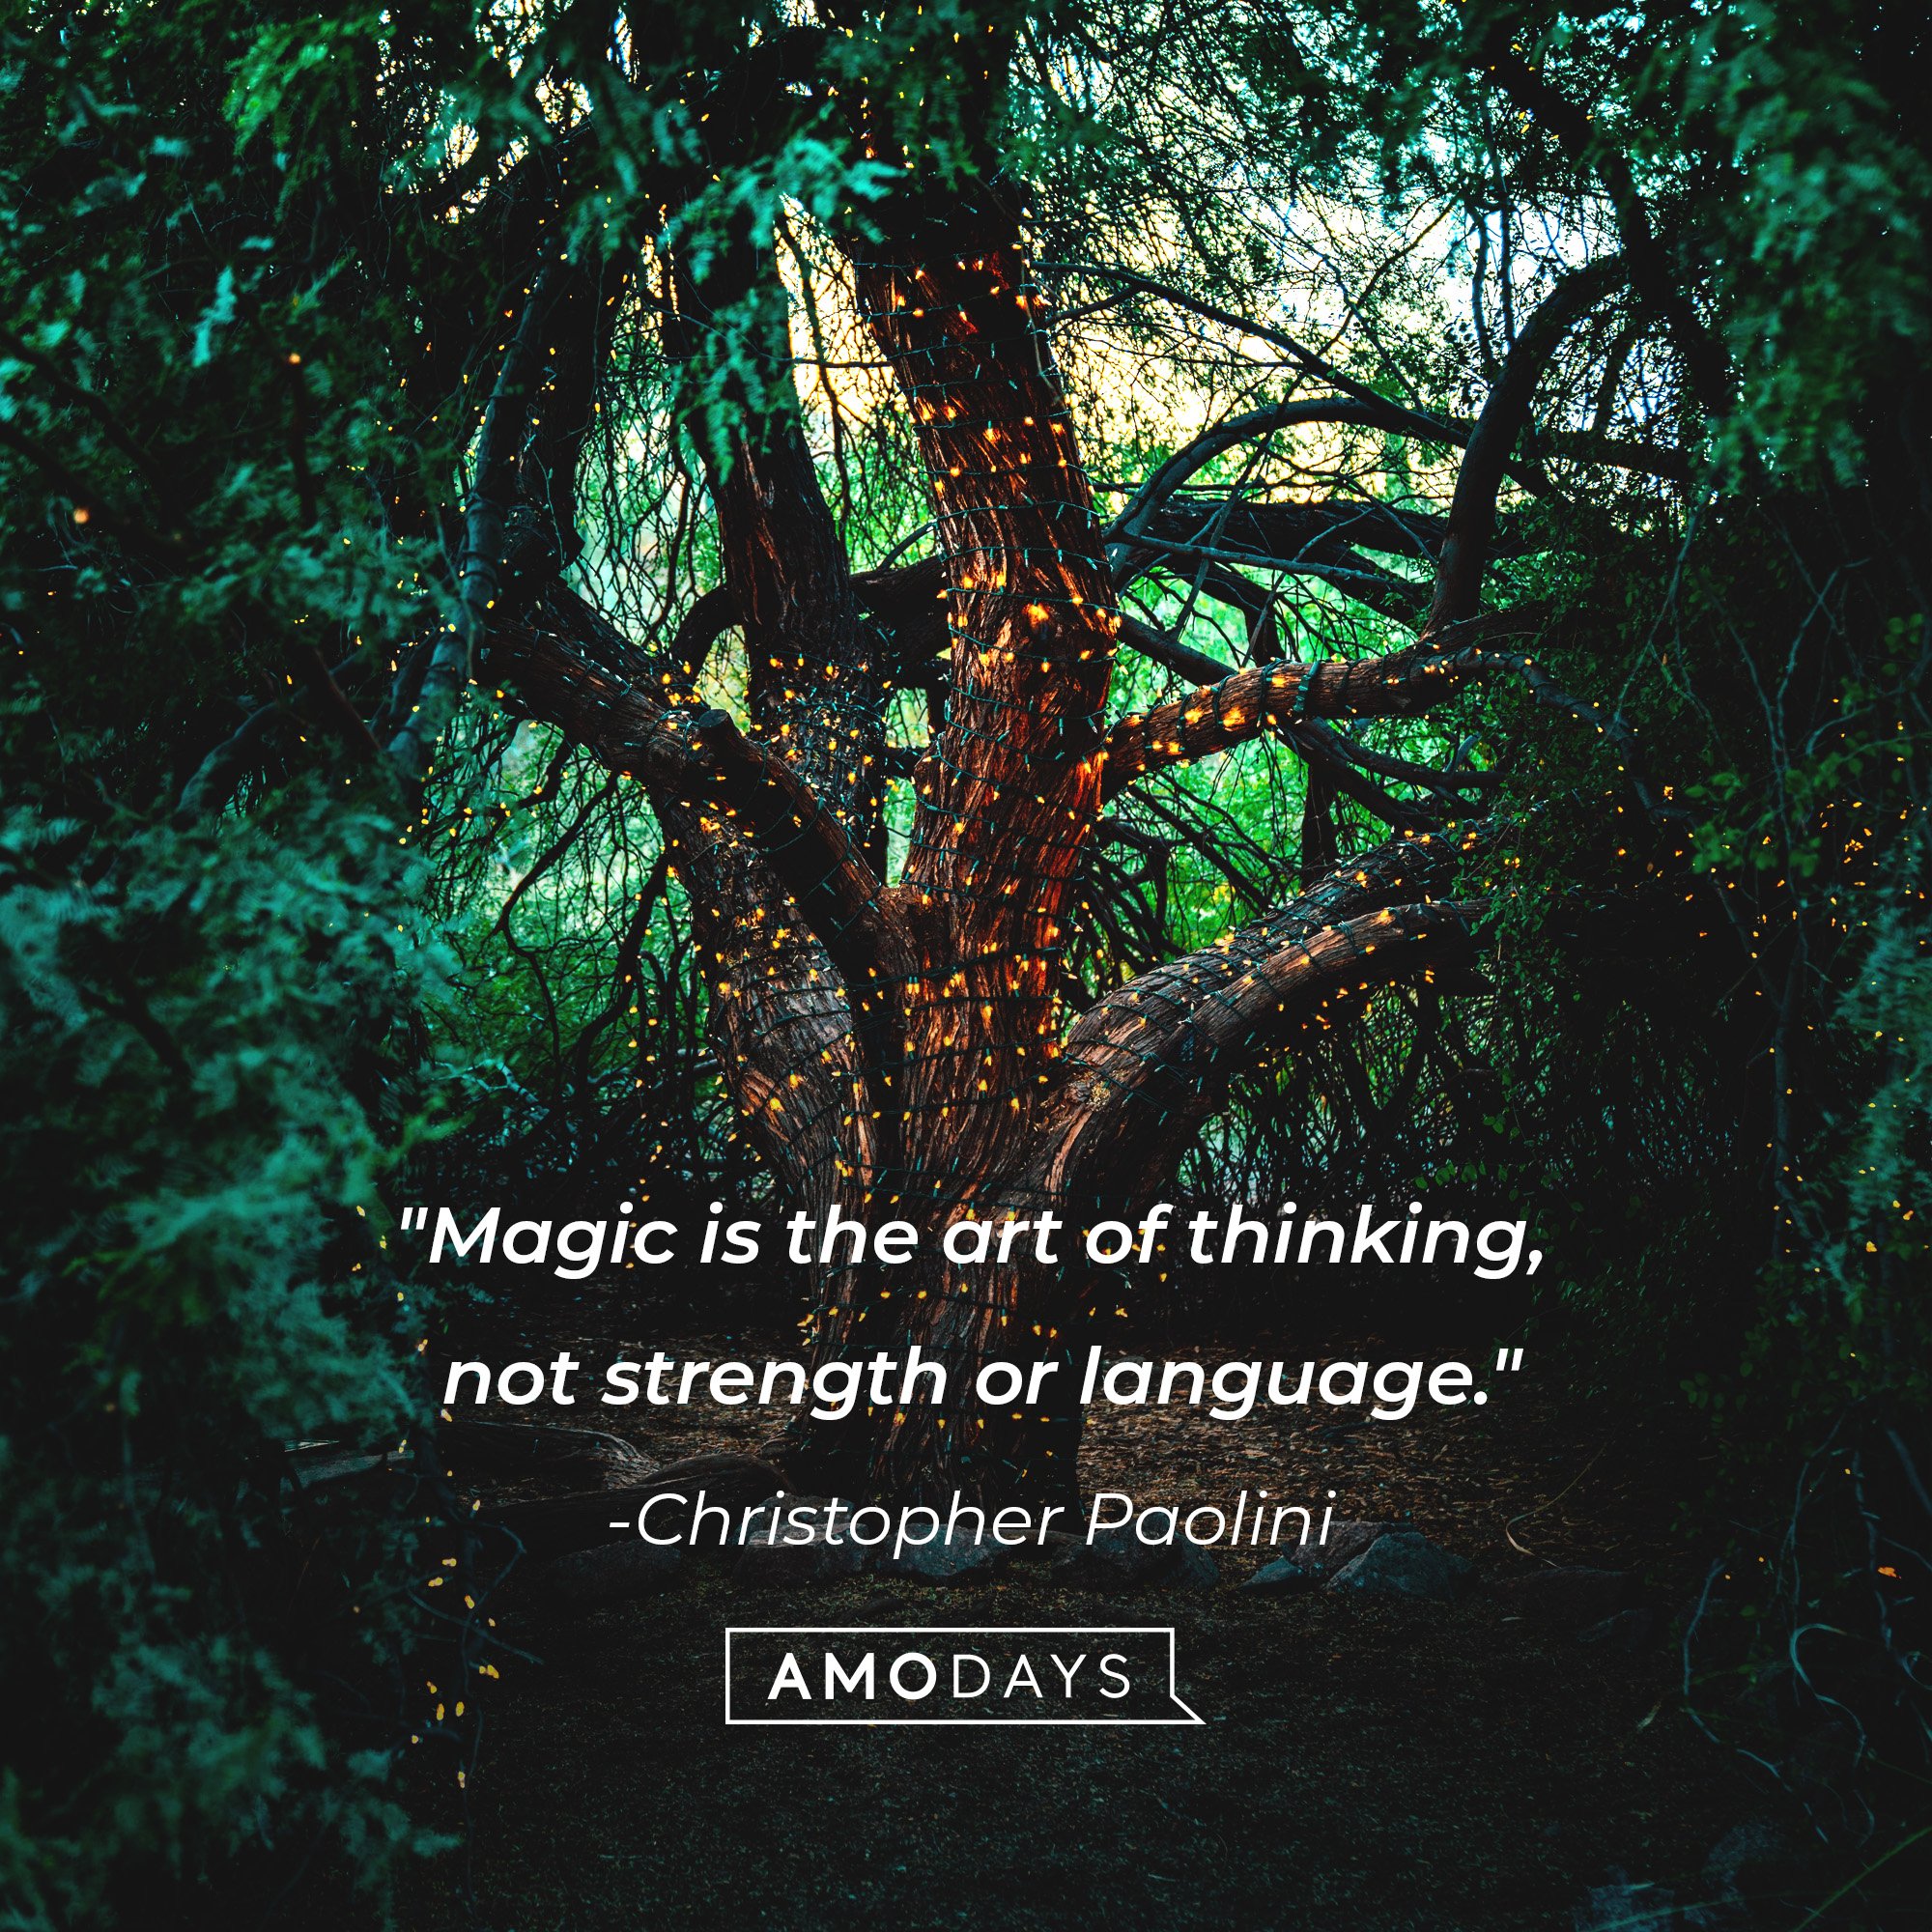 Christopher Paolini’s quote: "Magic is the art of thinking, not strength or language." | Image: AmoDays